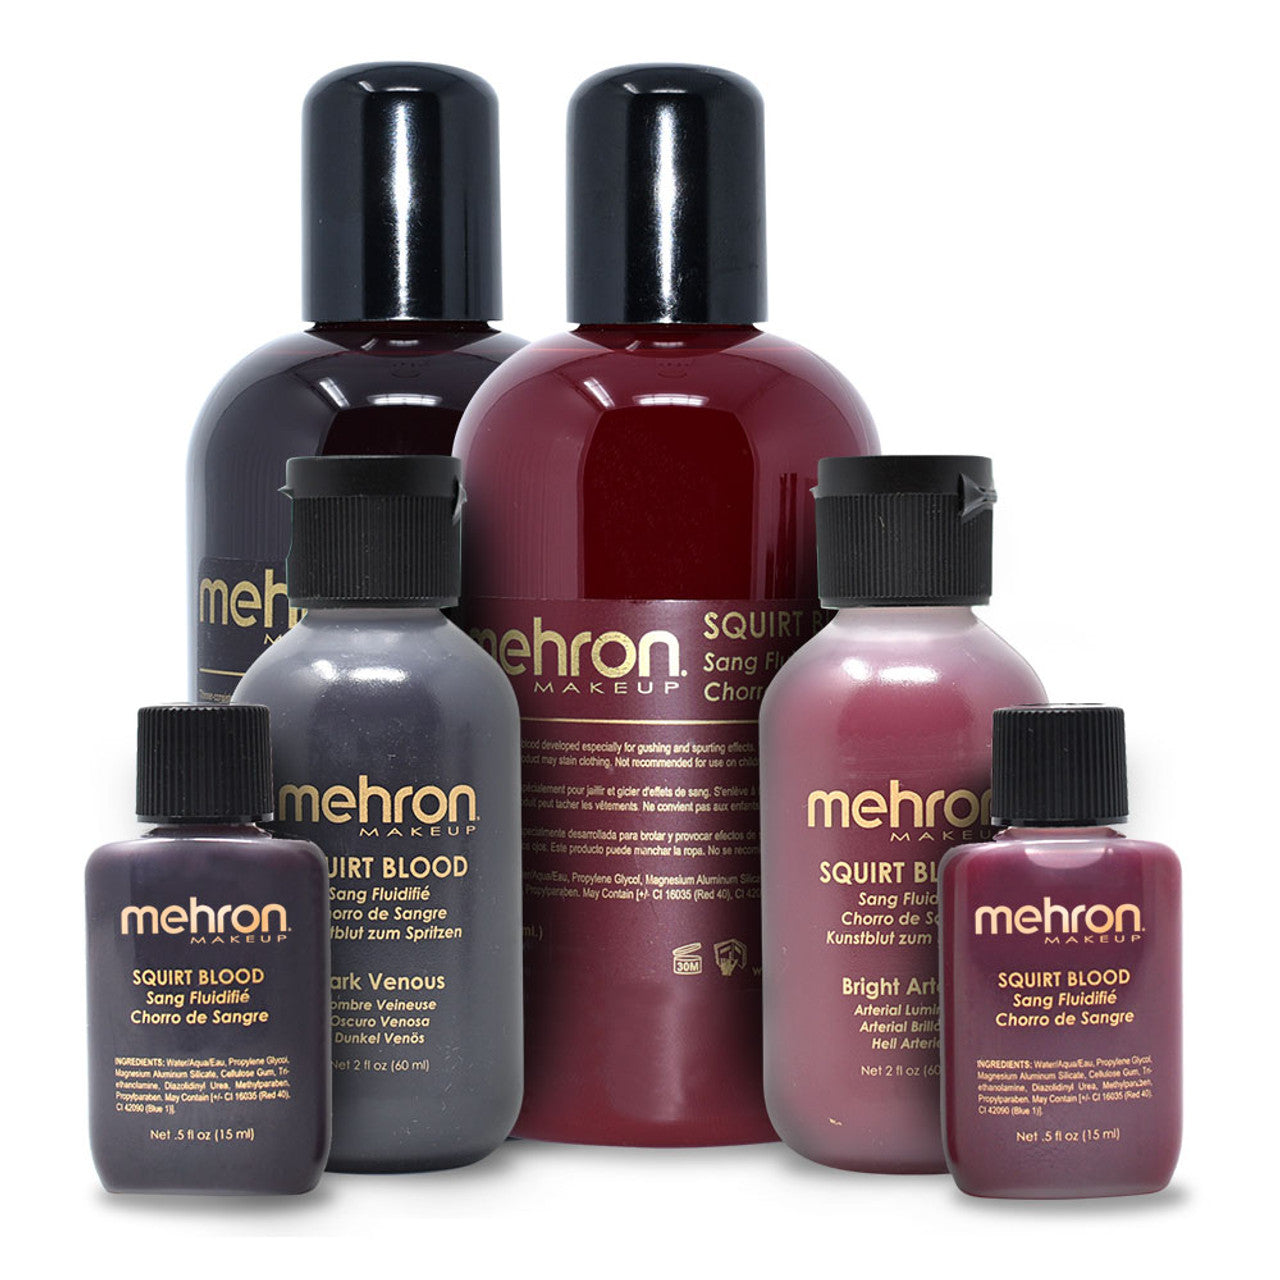 Mehron COSTUMES: MAKE-UP Squirt Blood